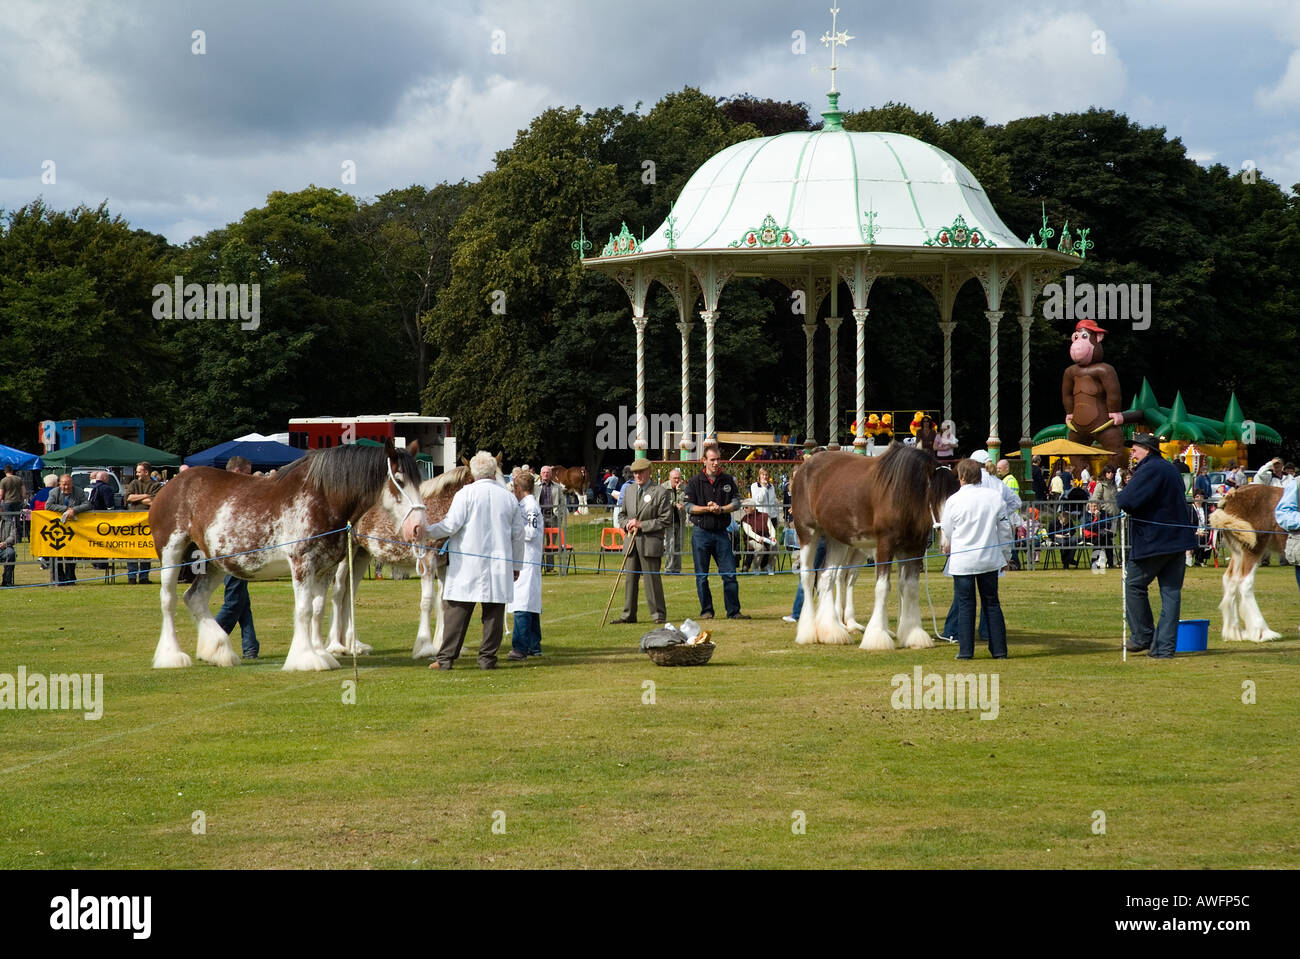 dh  DUTHIE PARK ABERDEEN Judge spectators looking at Clydesdale horses at Clydesdales show horse showing scotland Stock Photo